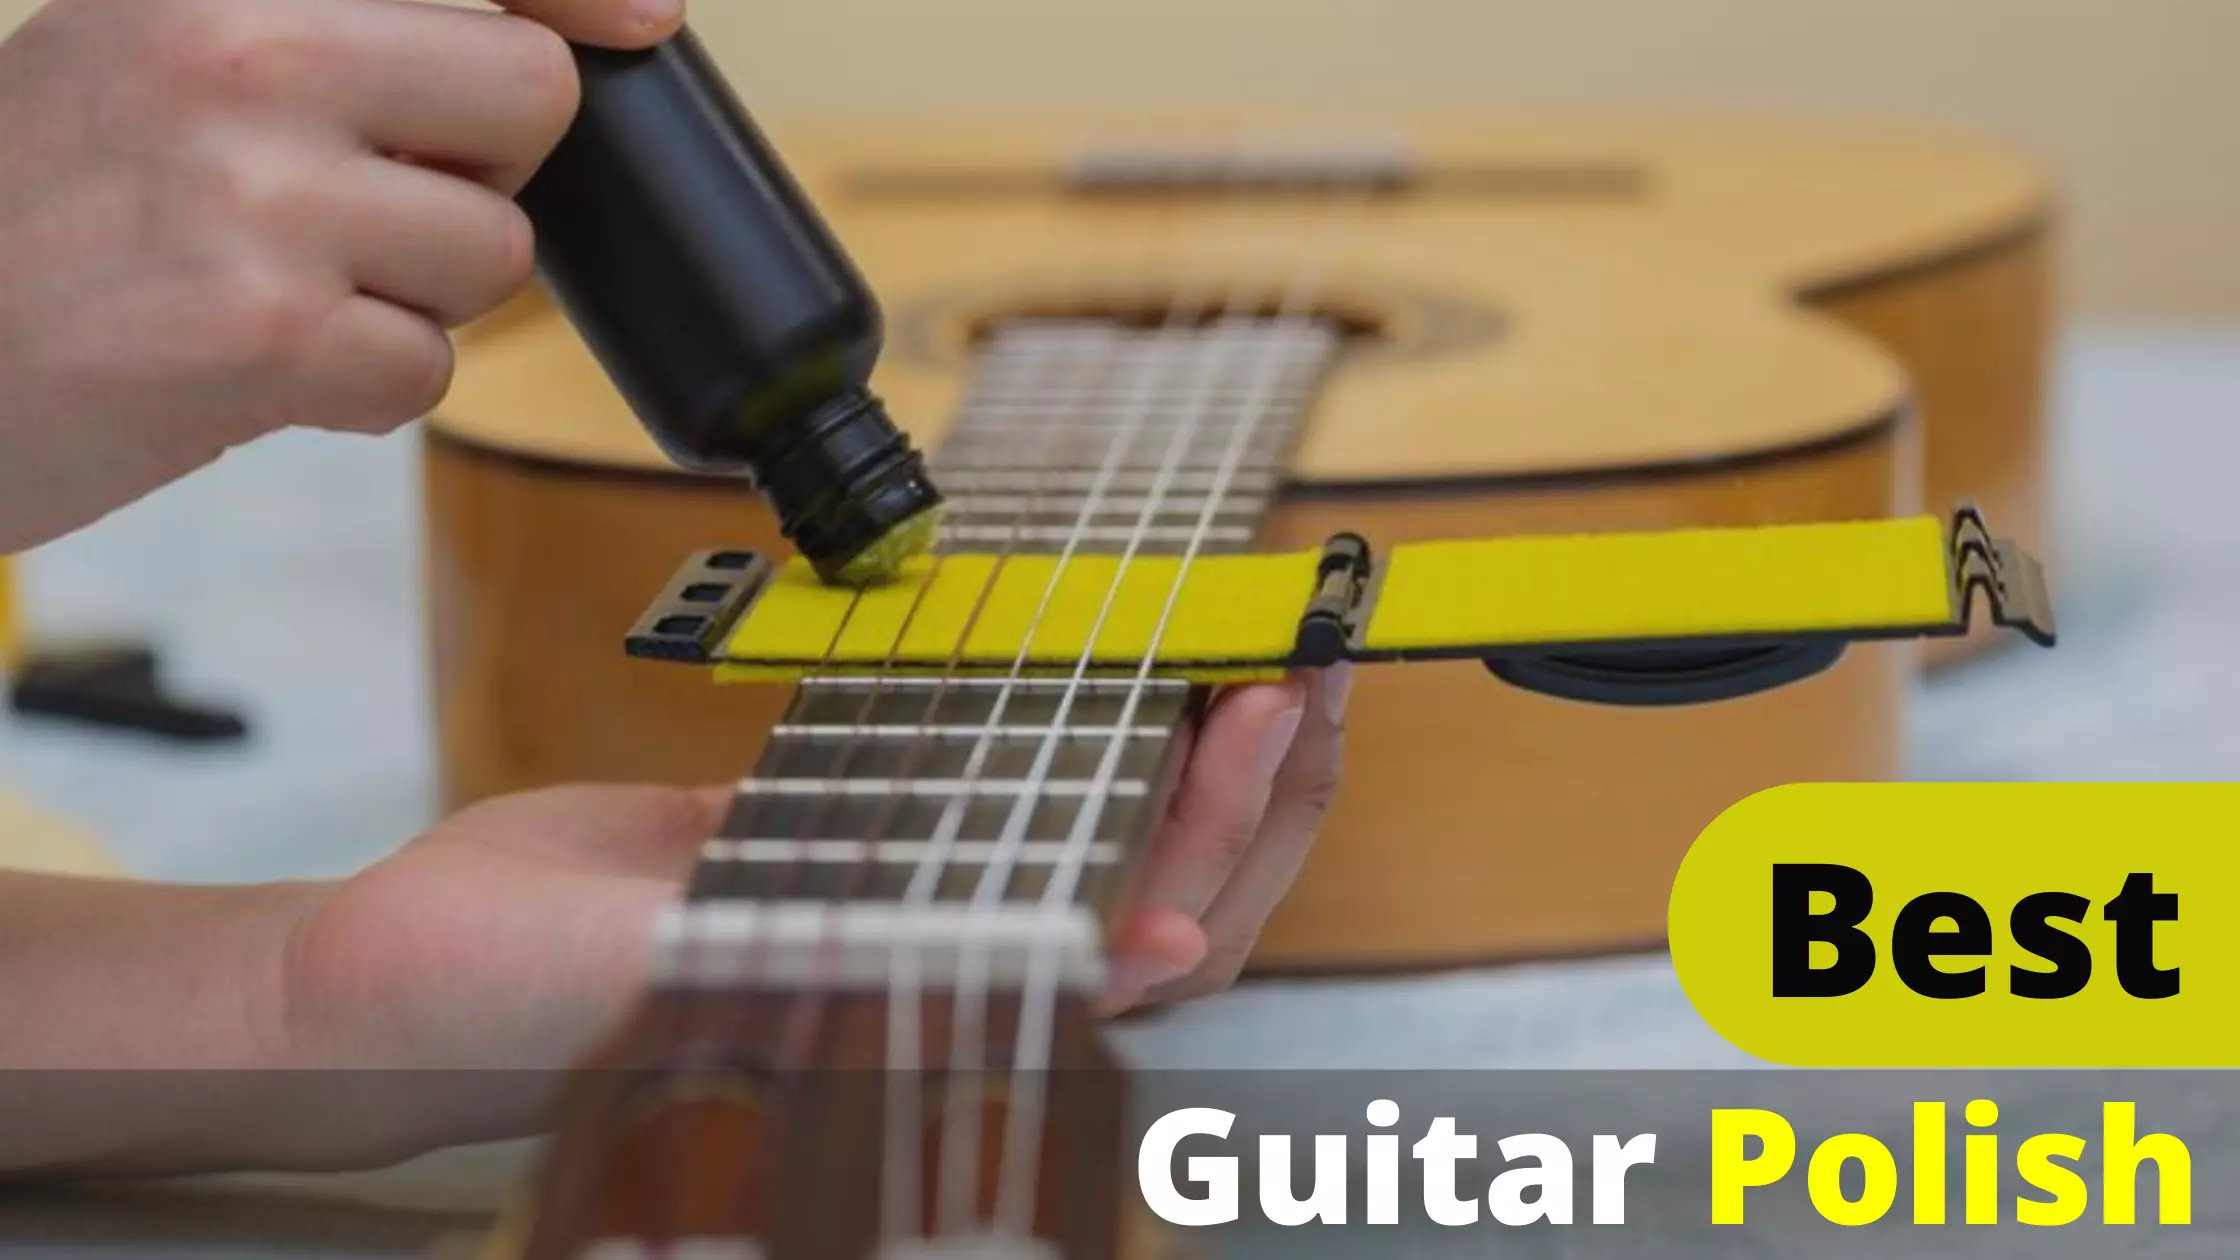 Top 10 Best Guitar Polish Reviews and Buying Guide 2022